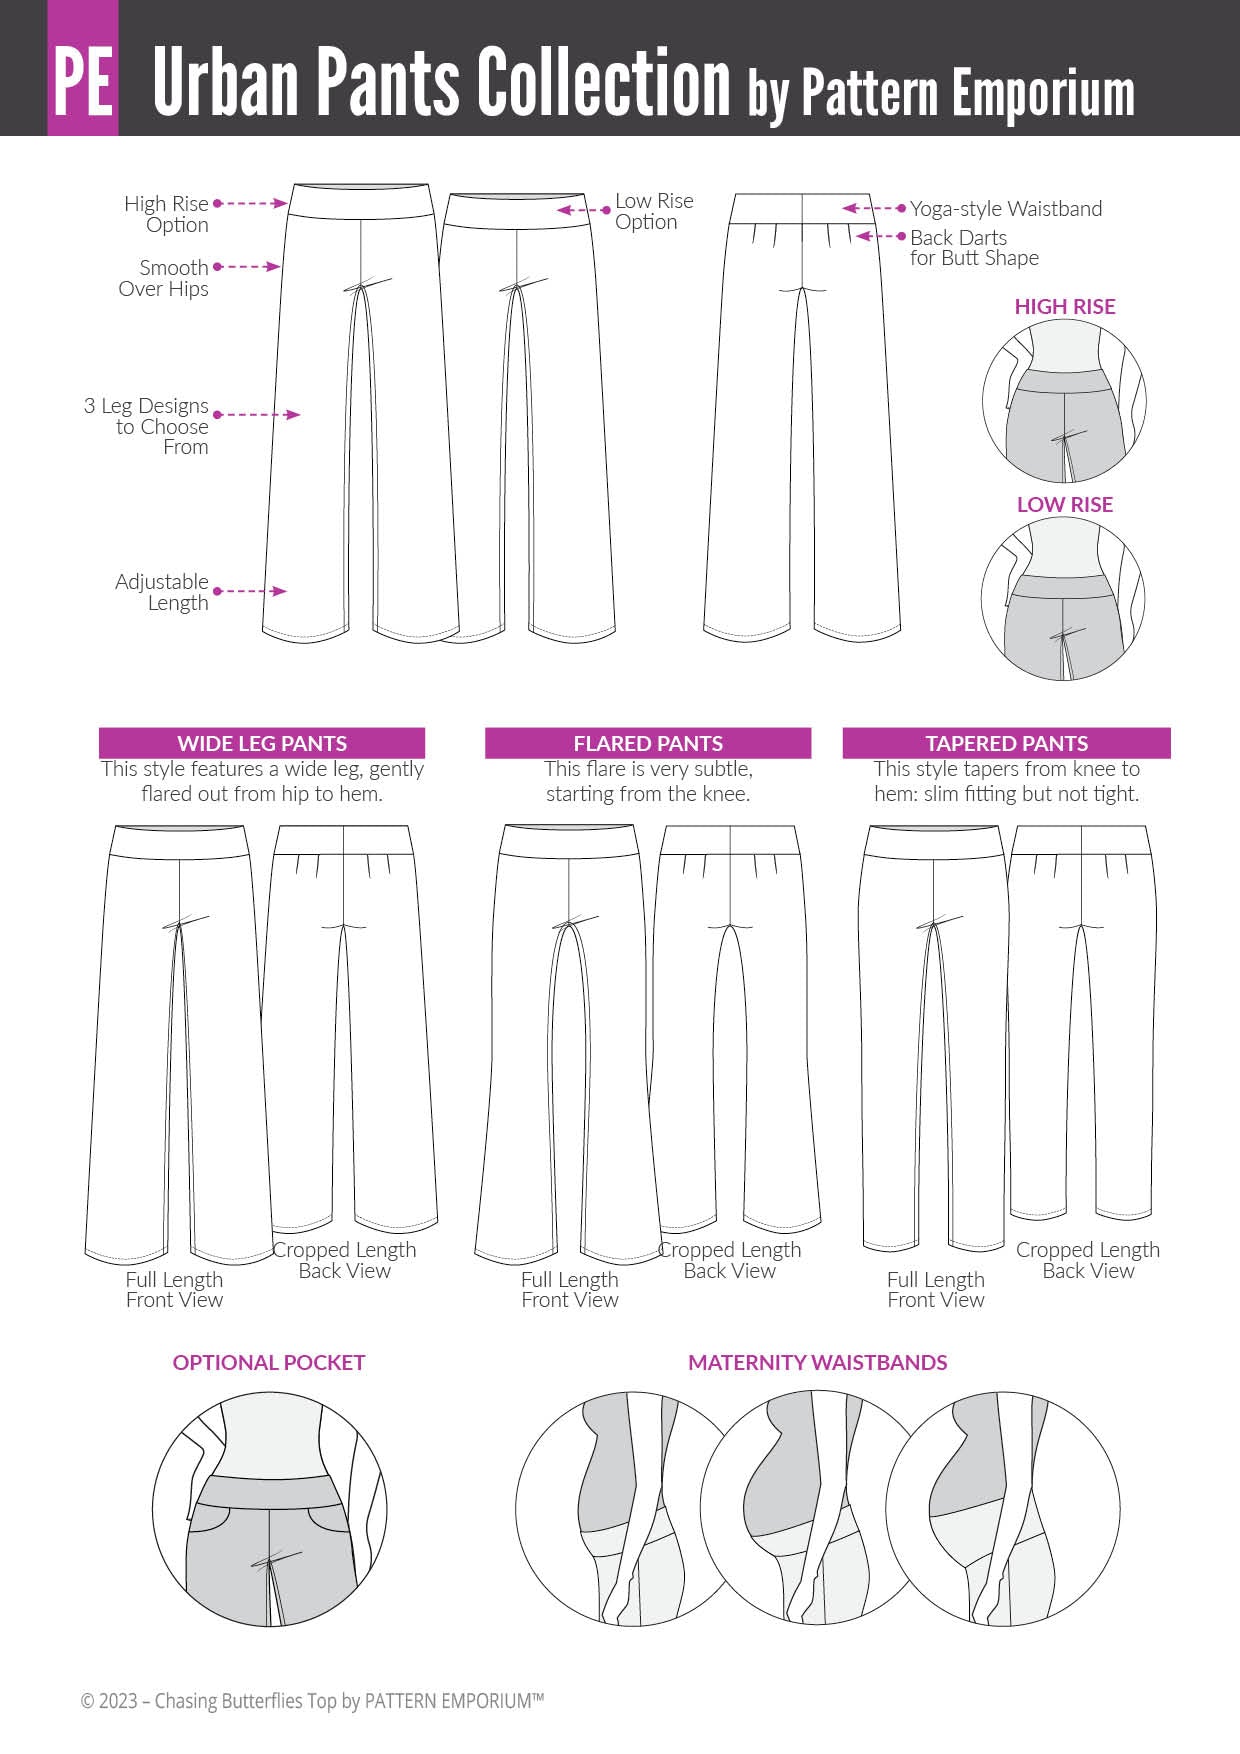 How to Recreate a Pant Pattern